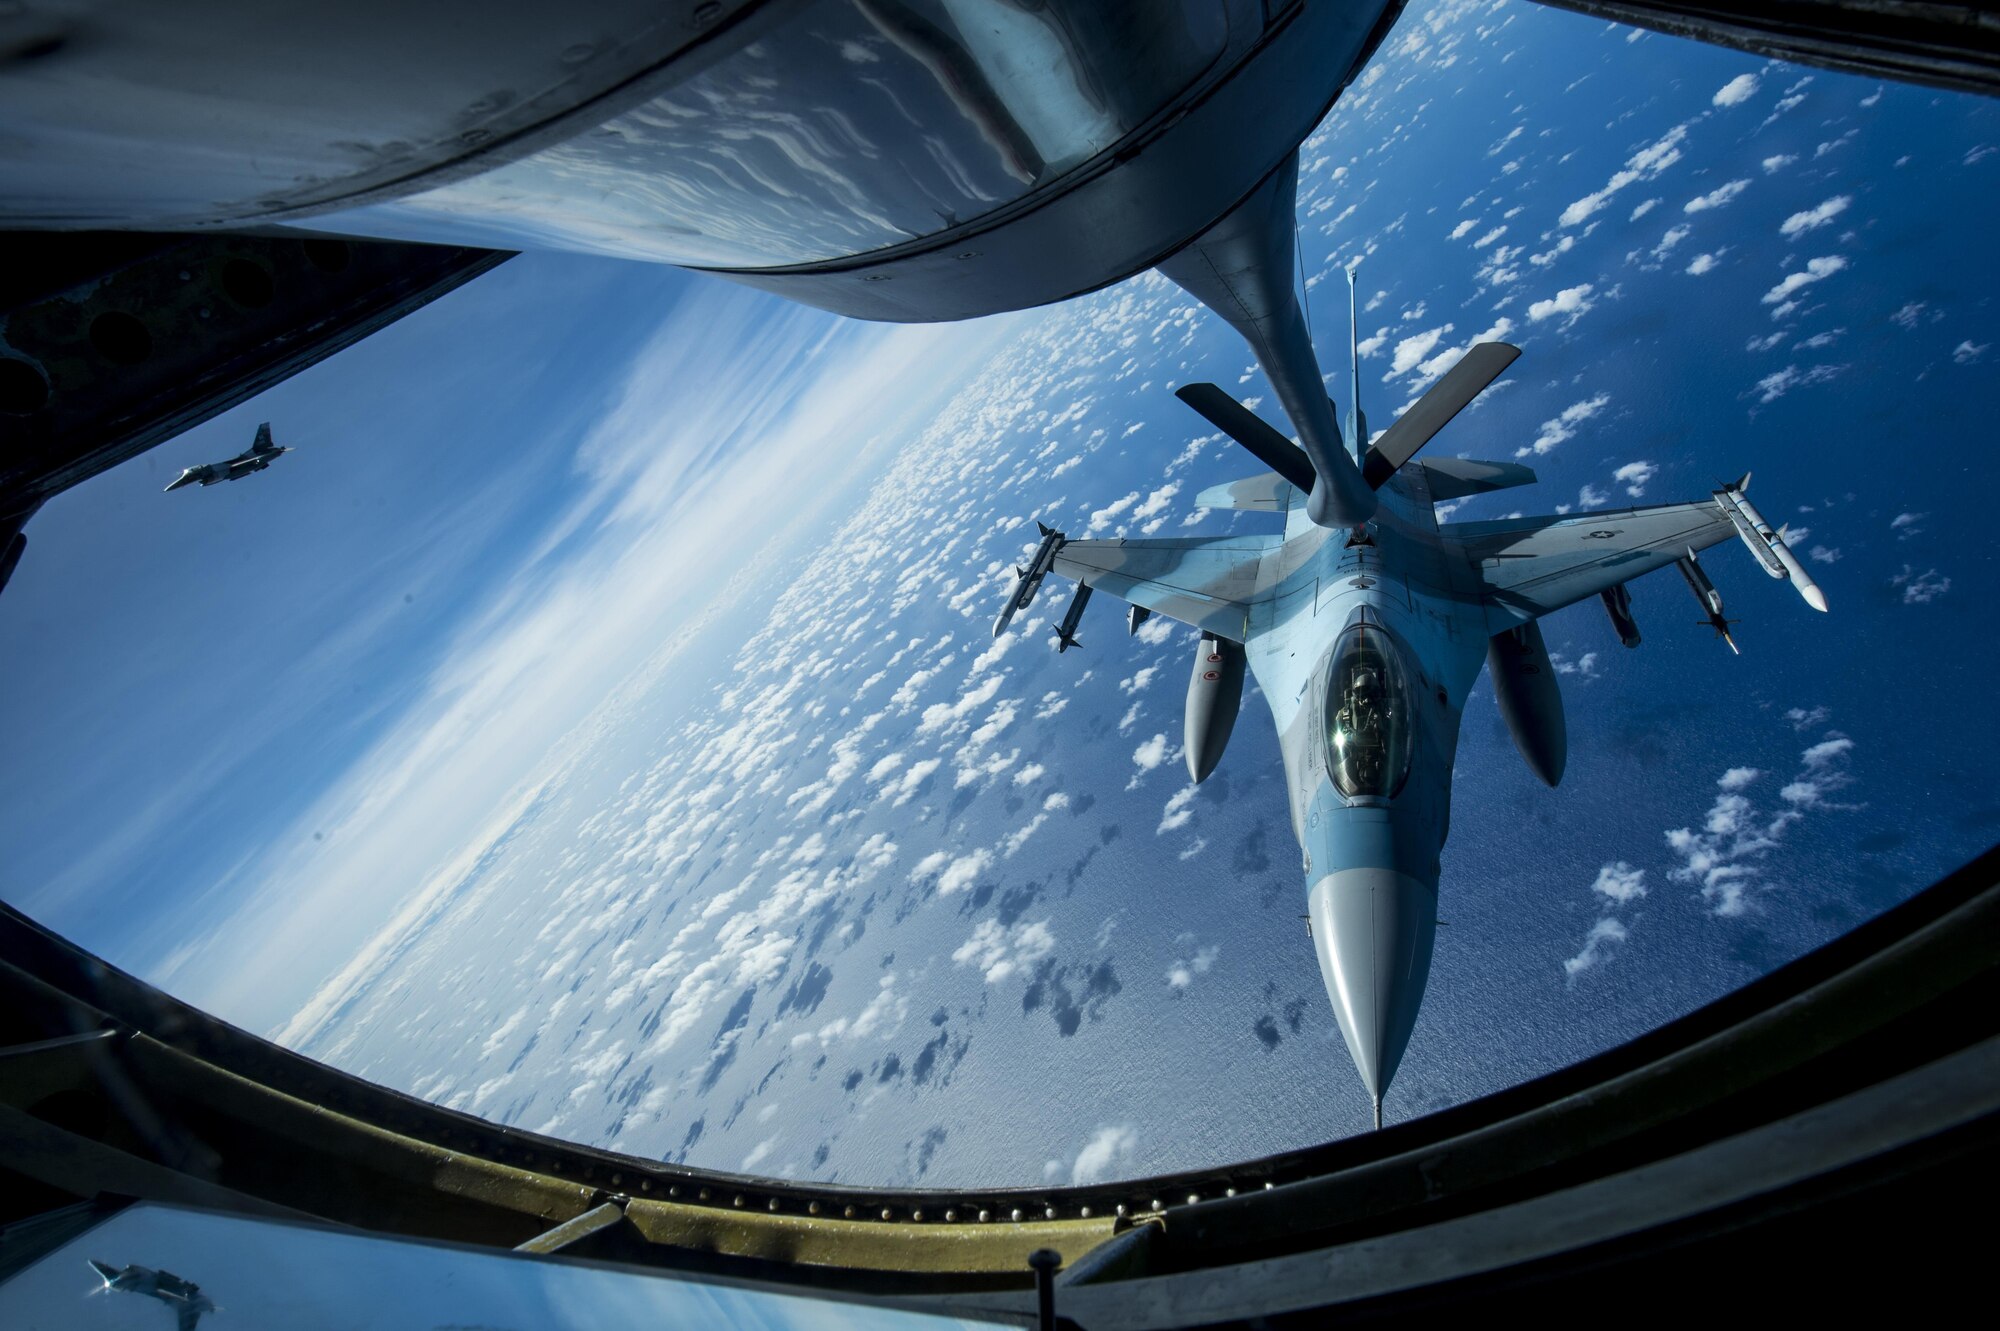 U.S. Air Force F-16 Fighting Falcons assigned to the 18th Aggressor Squadron receives in-flight fuel from a U.S. Air Force KC-135 Stratotanker during Cope North 17, March 2, 2017. The exercise includes 22 total flying units and more than 2,700 personnel from three countries and continues the growth of strong, interoperable relationships within the Indo-Asia-Pacific region through integration of airborne and land-based command and control assets. (U.S. Air Force photo by Staff Sgt. Keith James)